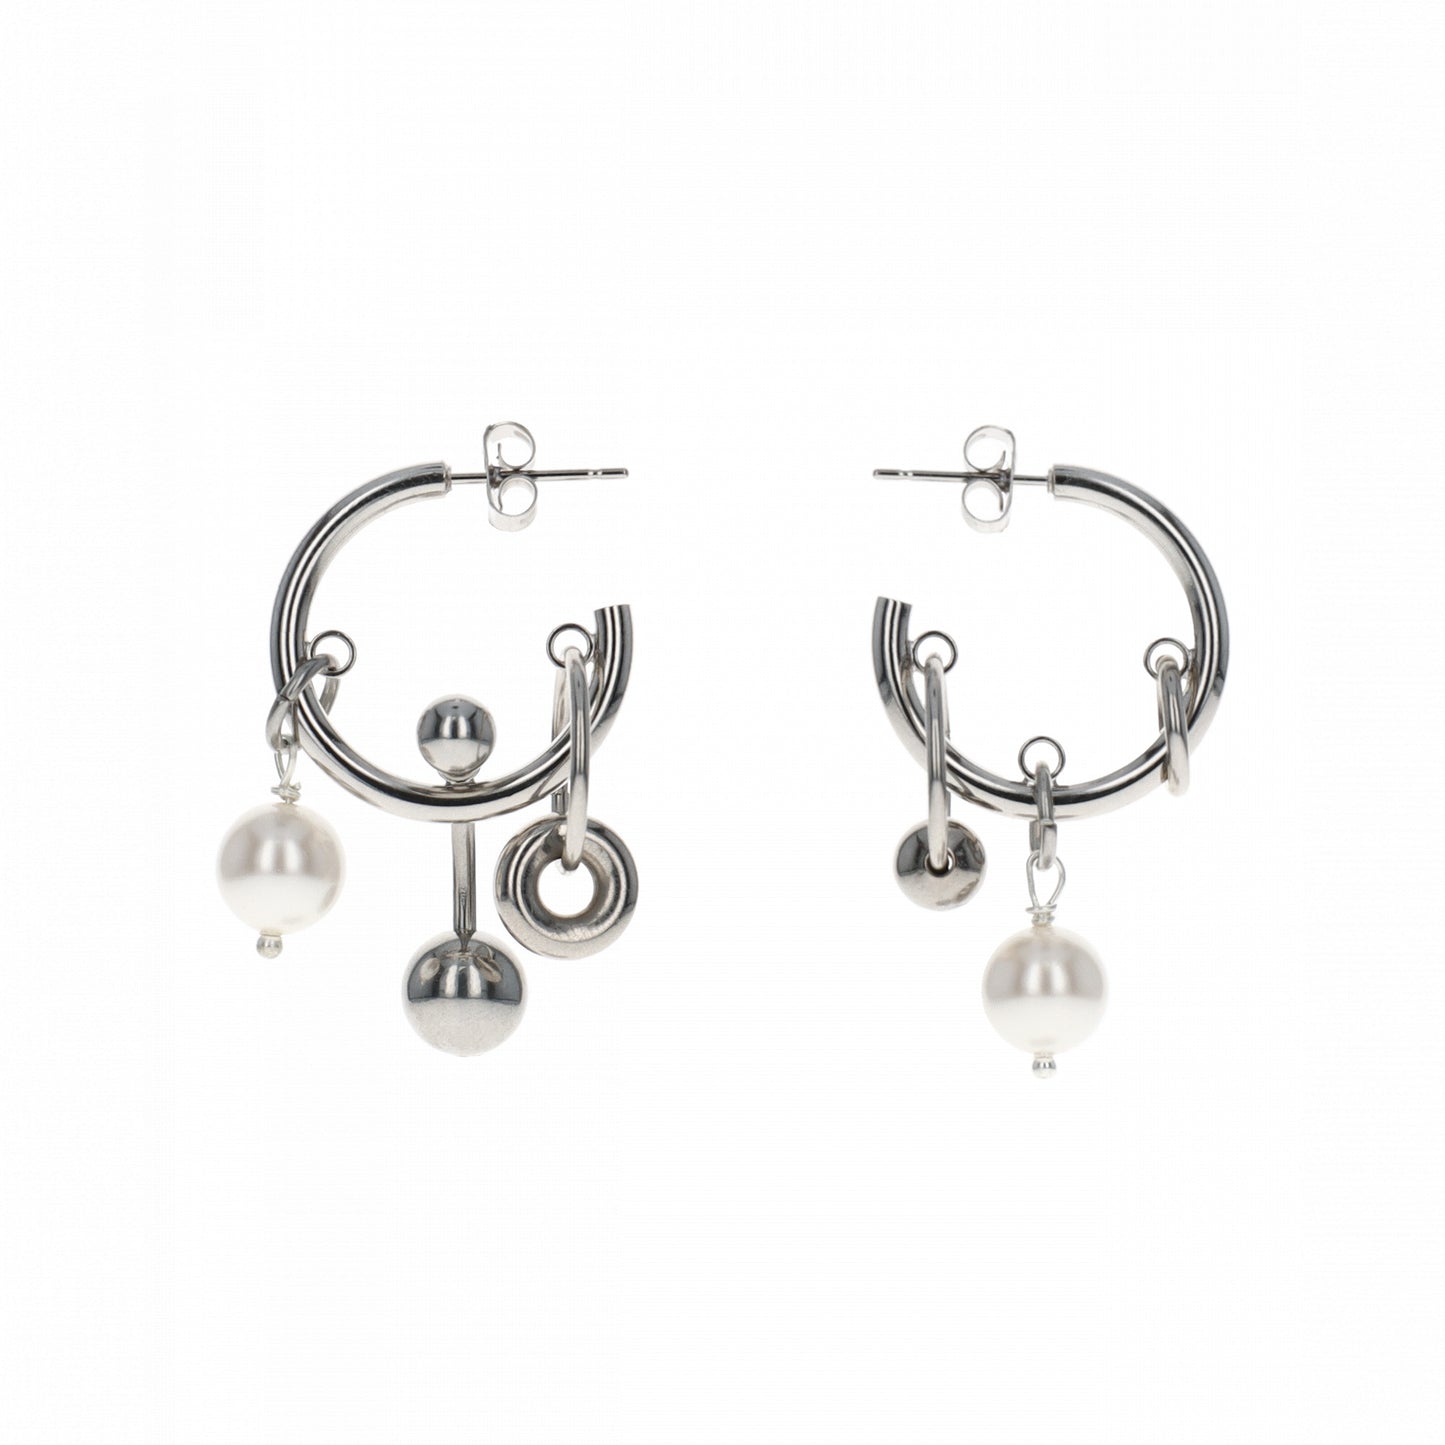 Justine Clenquet Robyn Earrings, Palladium